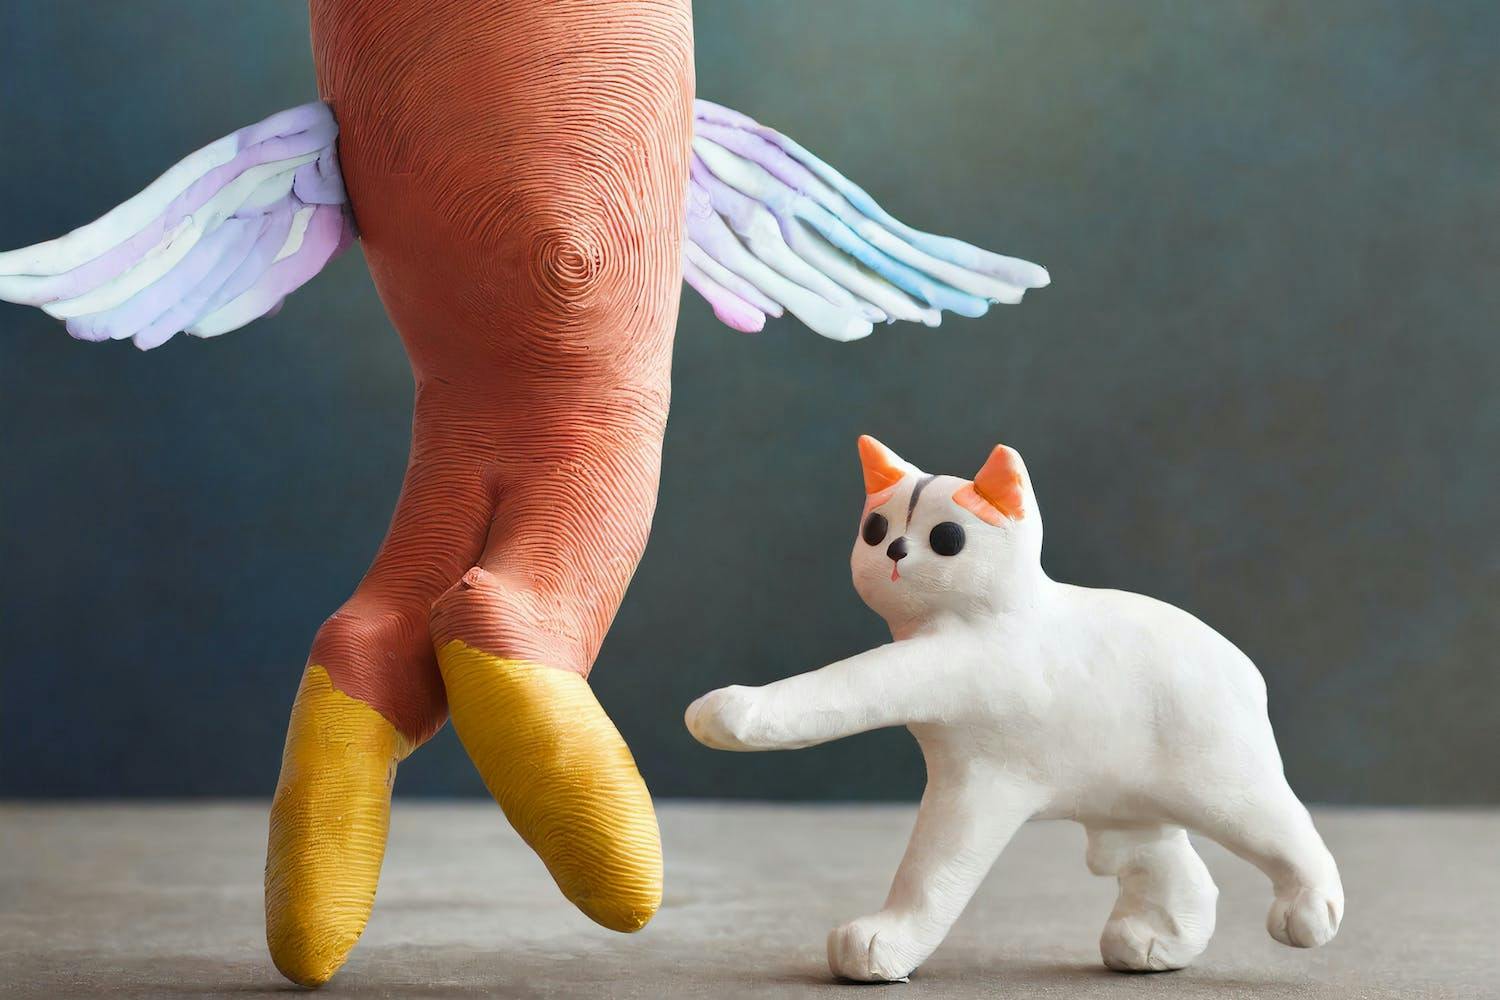 A plasticine cat says hello to plasticine fingers with wings and yellow fingertips